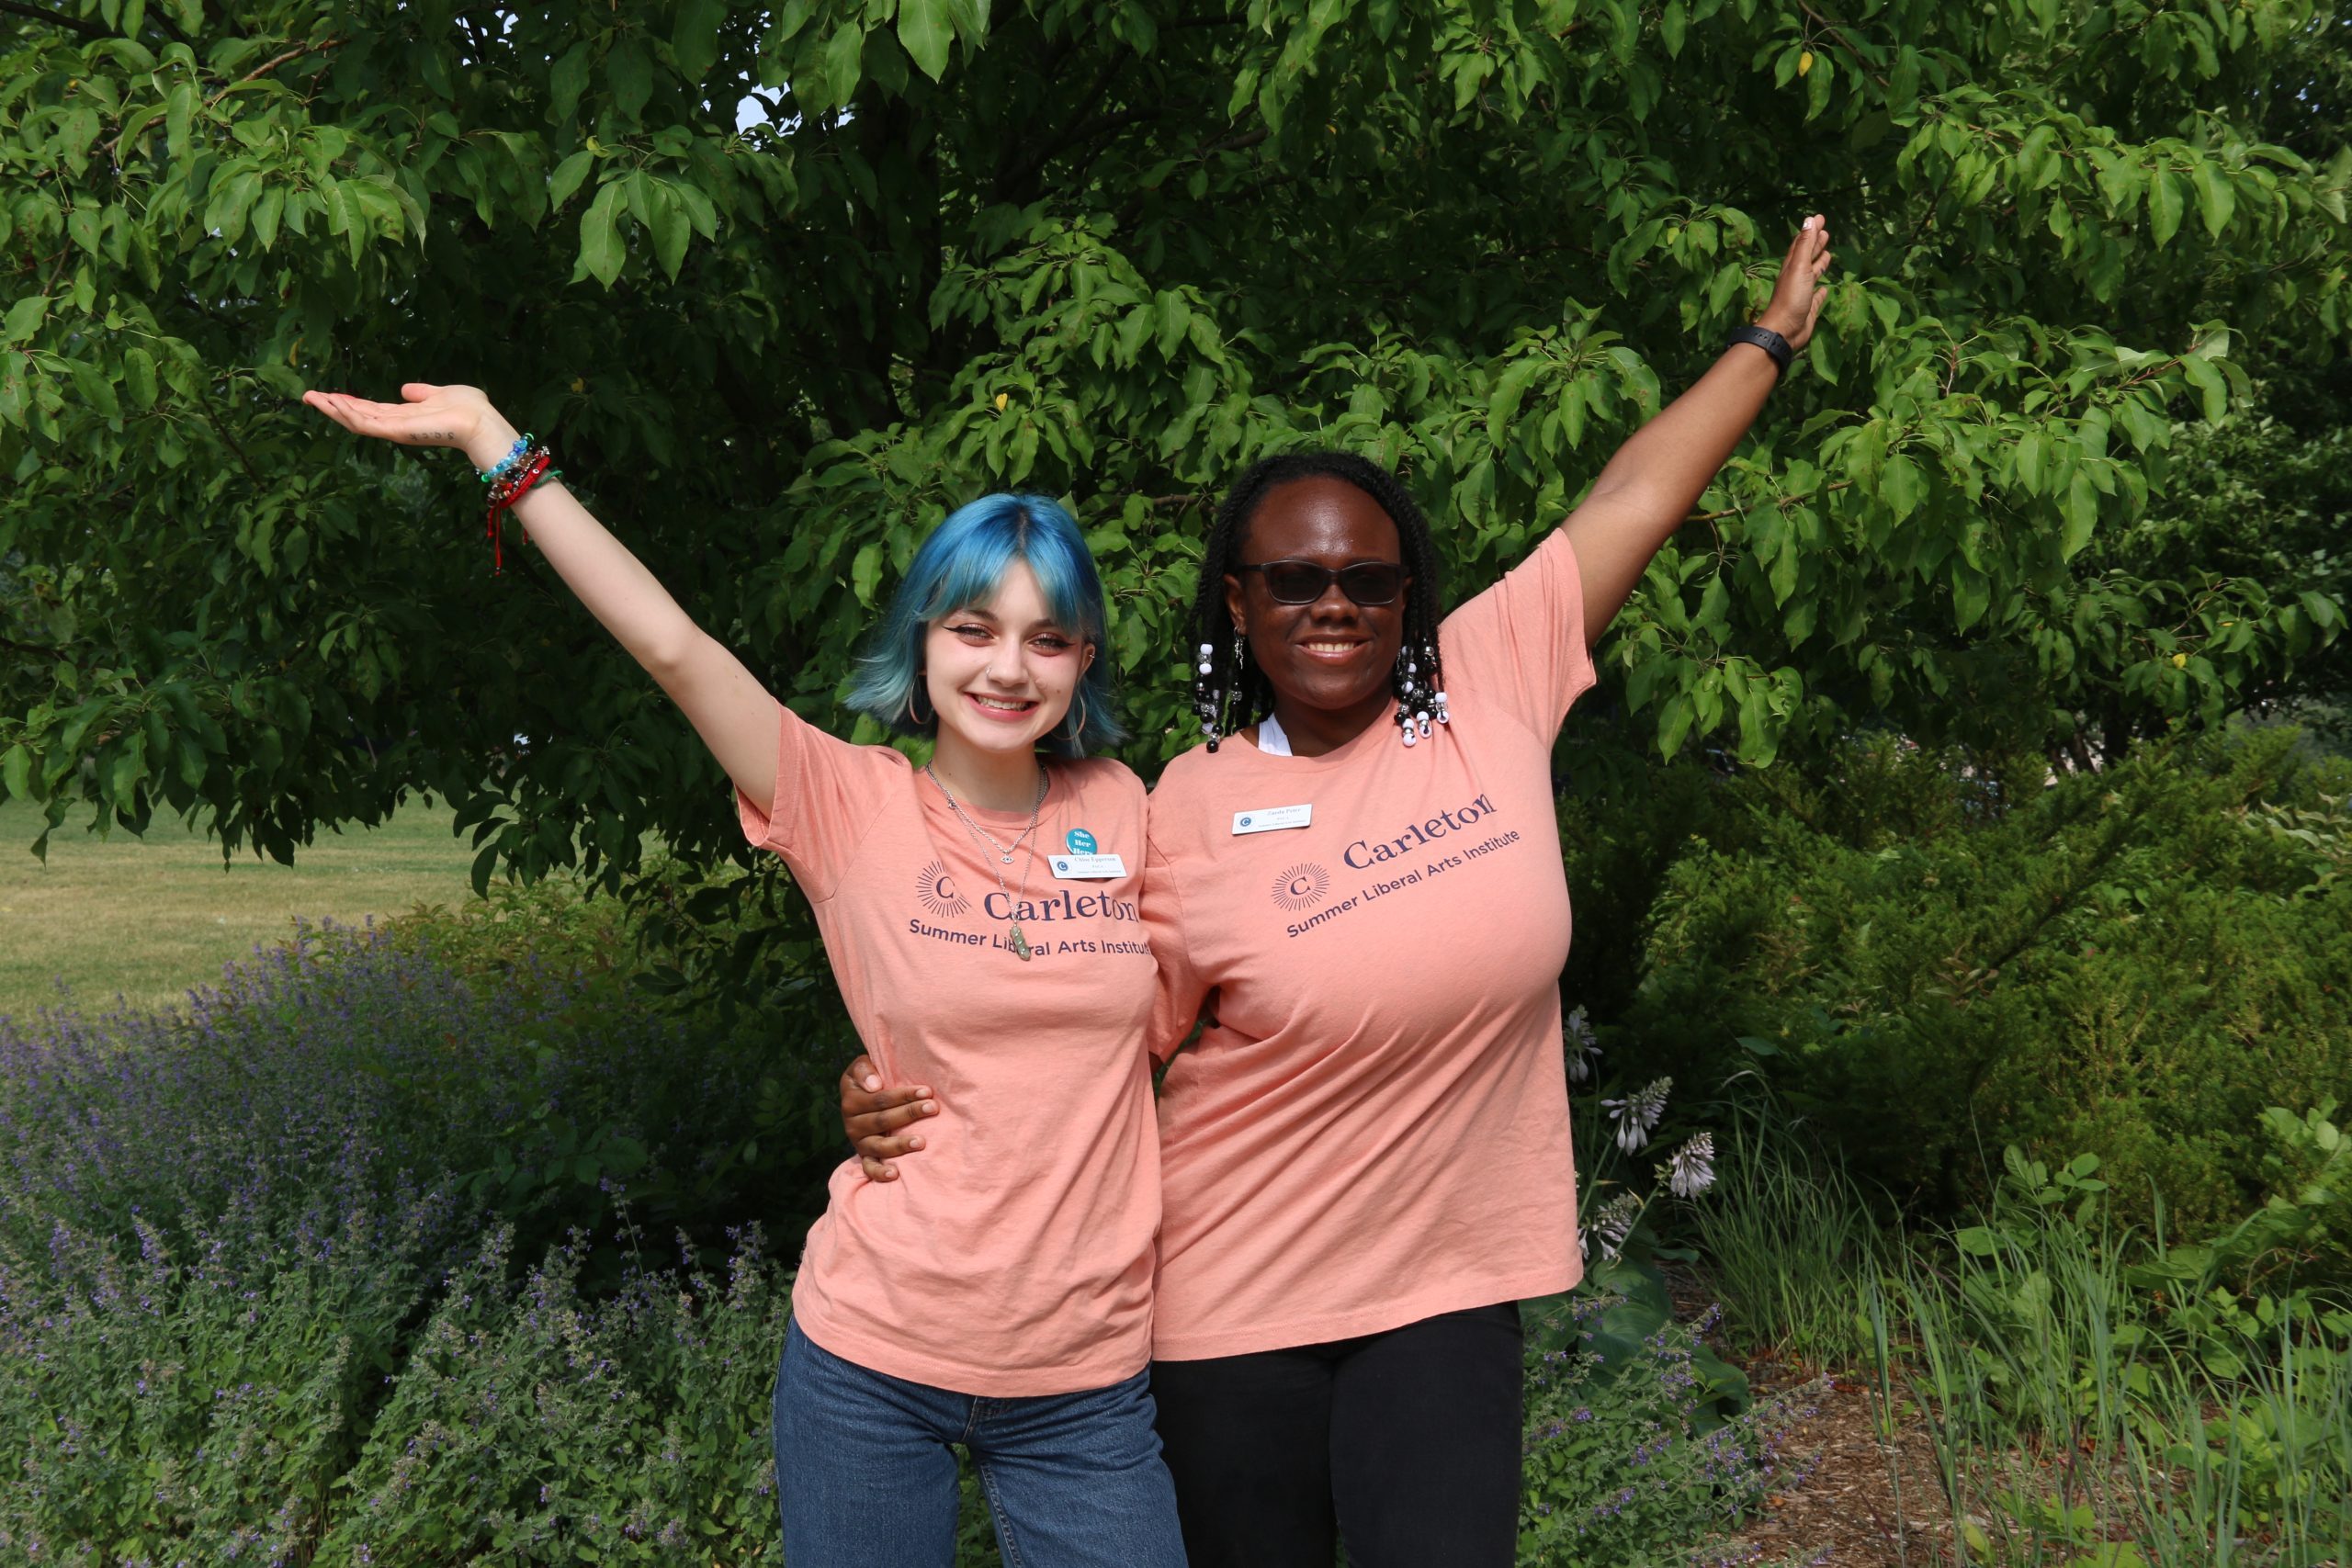 Two people wearing orange SLAC shirts smile and pose with their arms raised in the air.